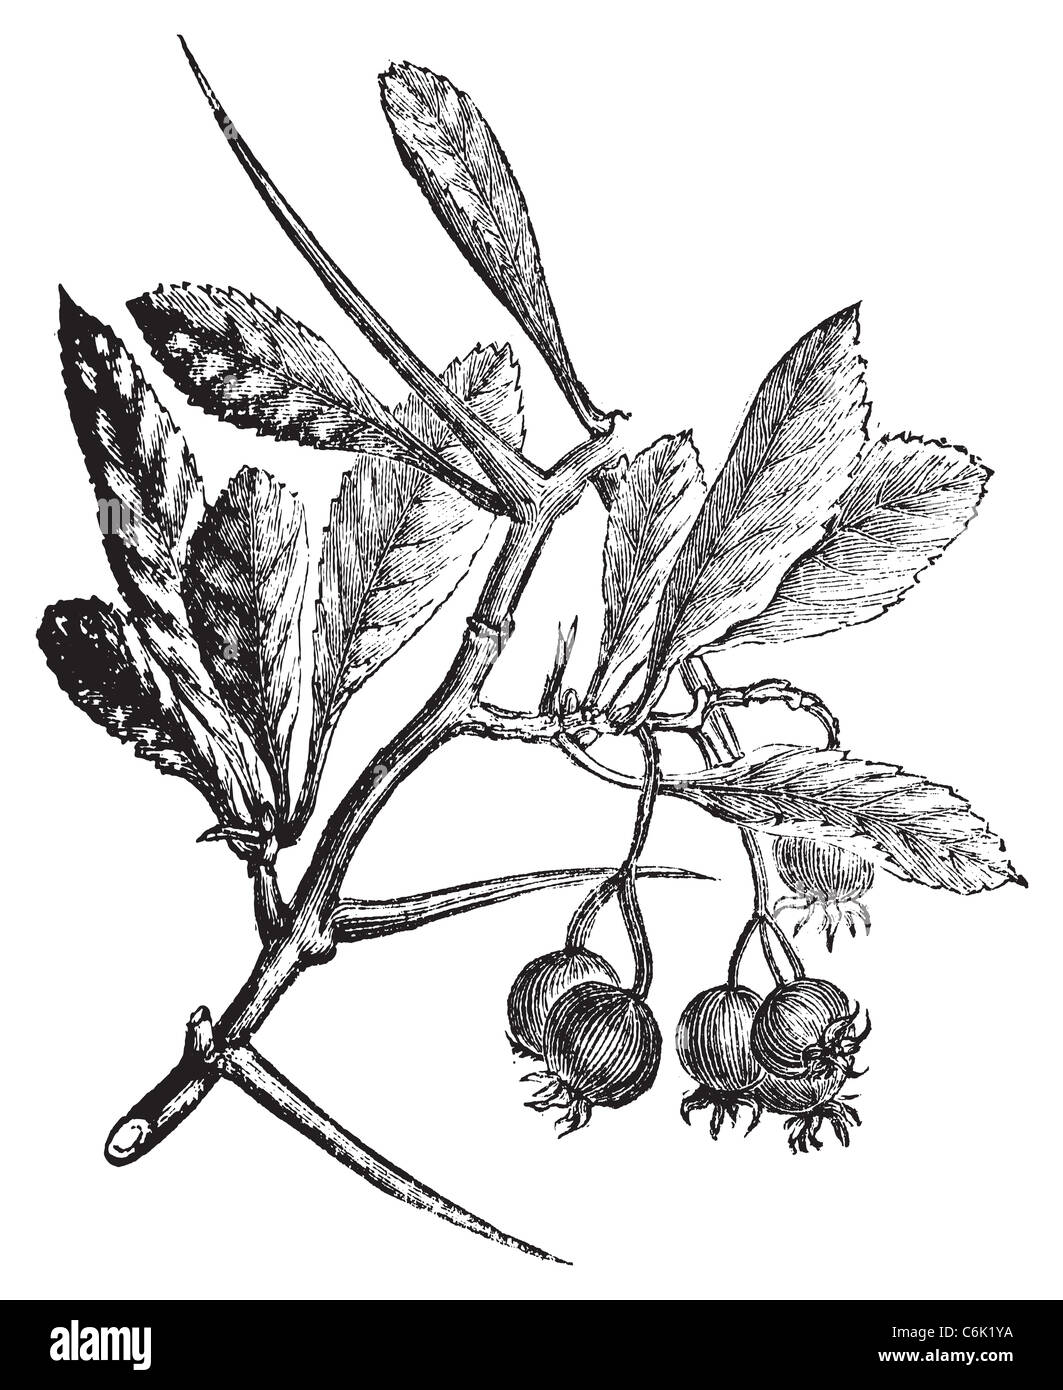 American Hawthorn vintage engraving. Old engraved illustration. Also called cockspur hawthorn and cockspur thorn. Stock Photo